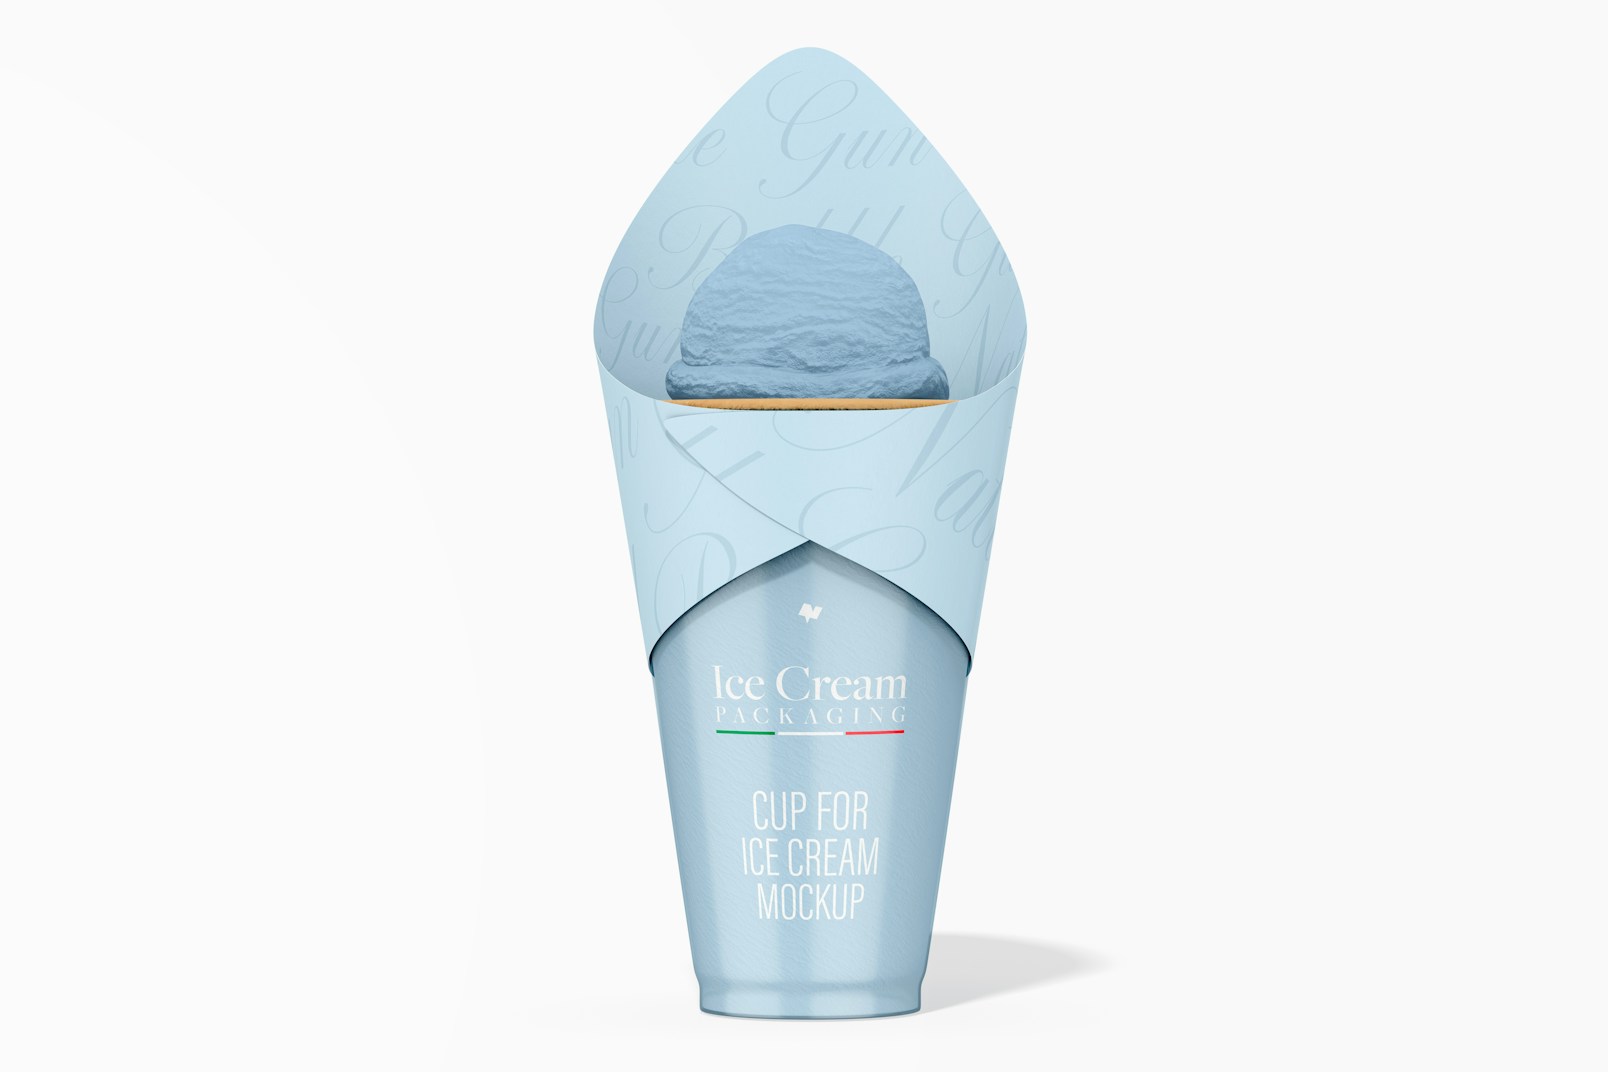 Cup for Ice Cream Mockup, Front View